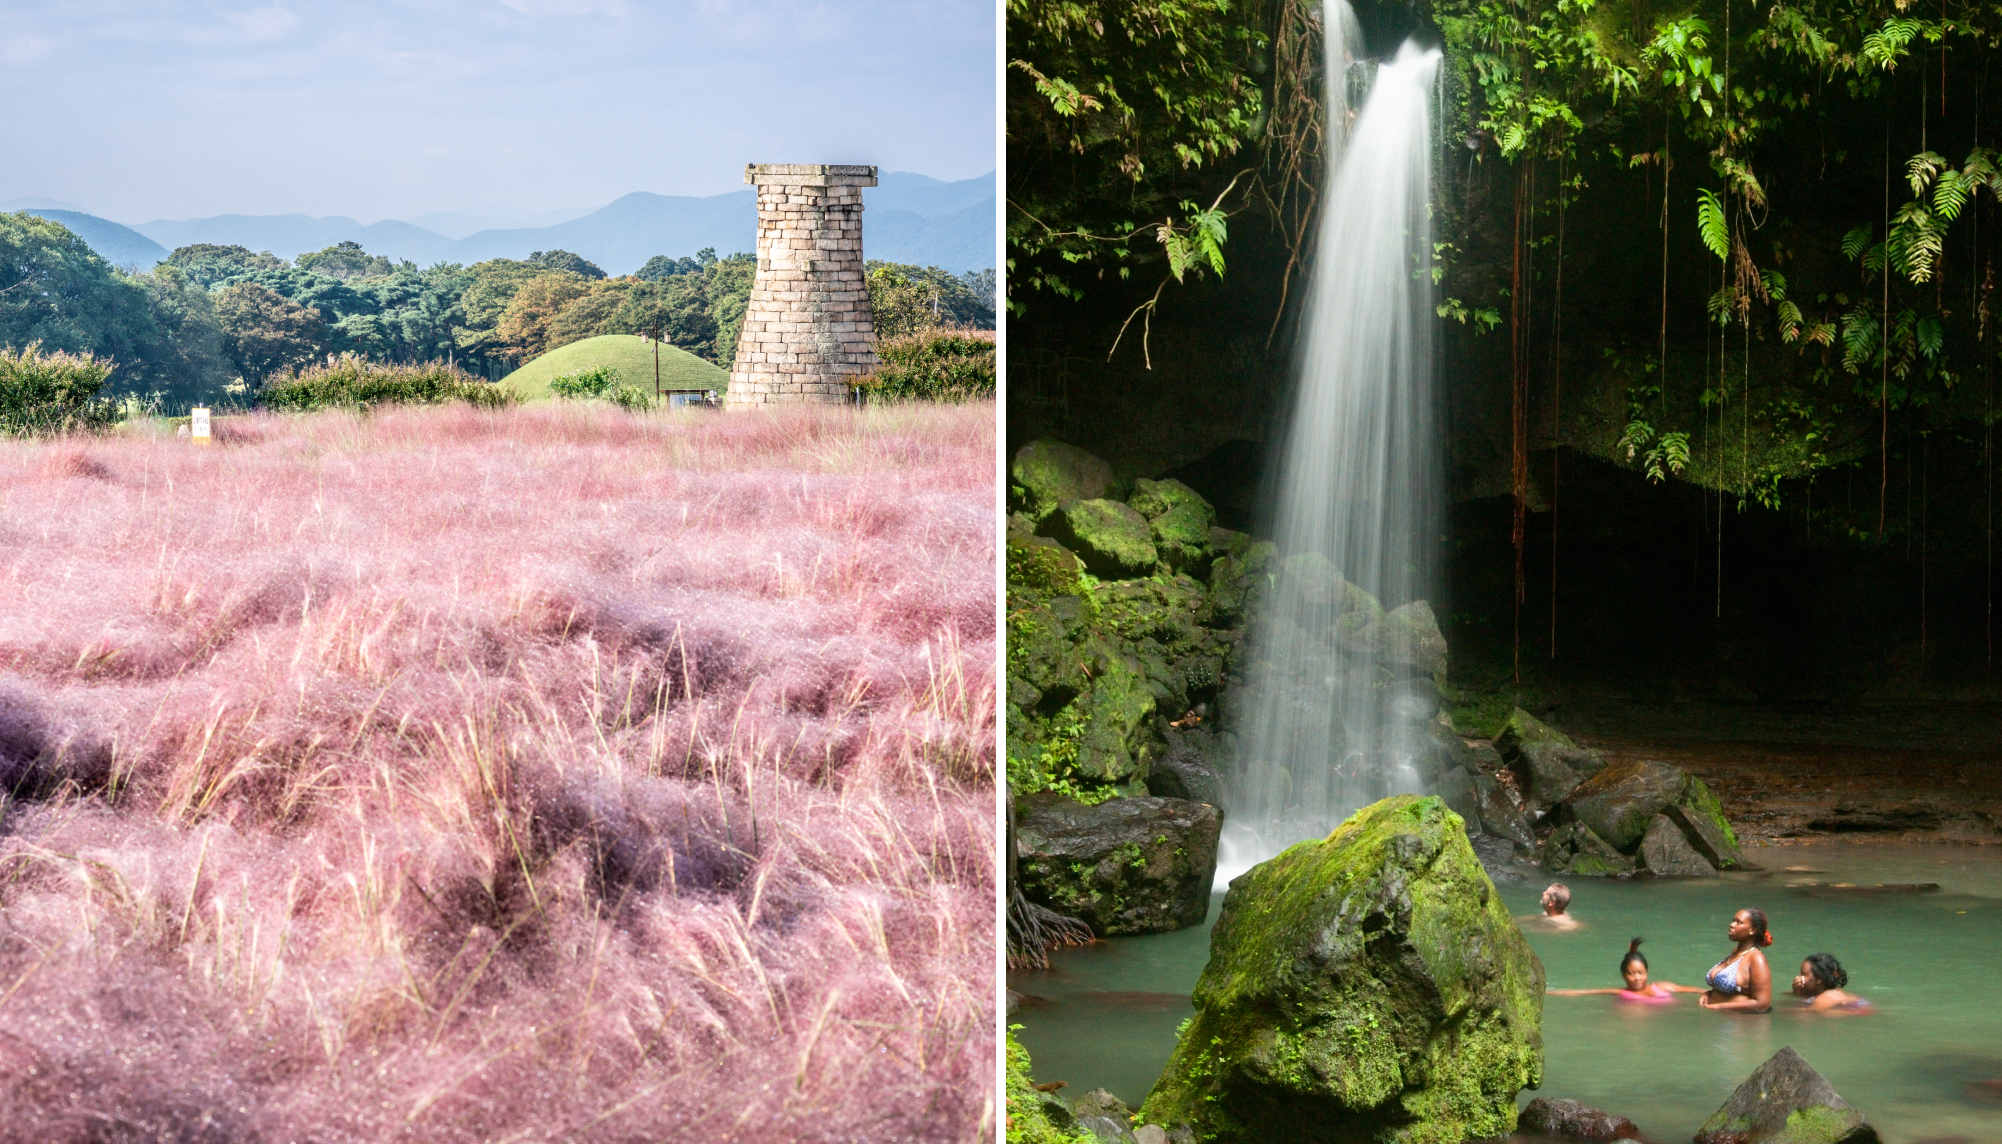 Field of Pink Muhly grass and Cheomseongdae an ancient Astrological Observatory in Gyeongju South Korea, Emerald Pool in Dominica 